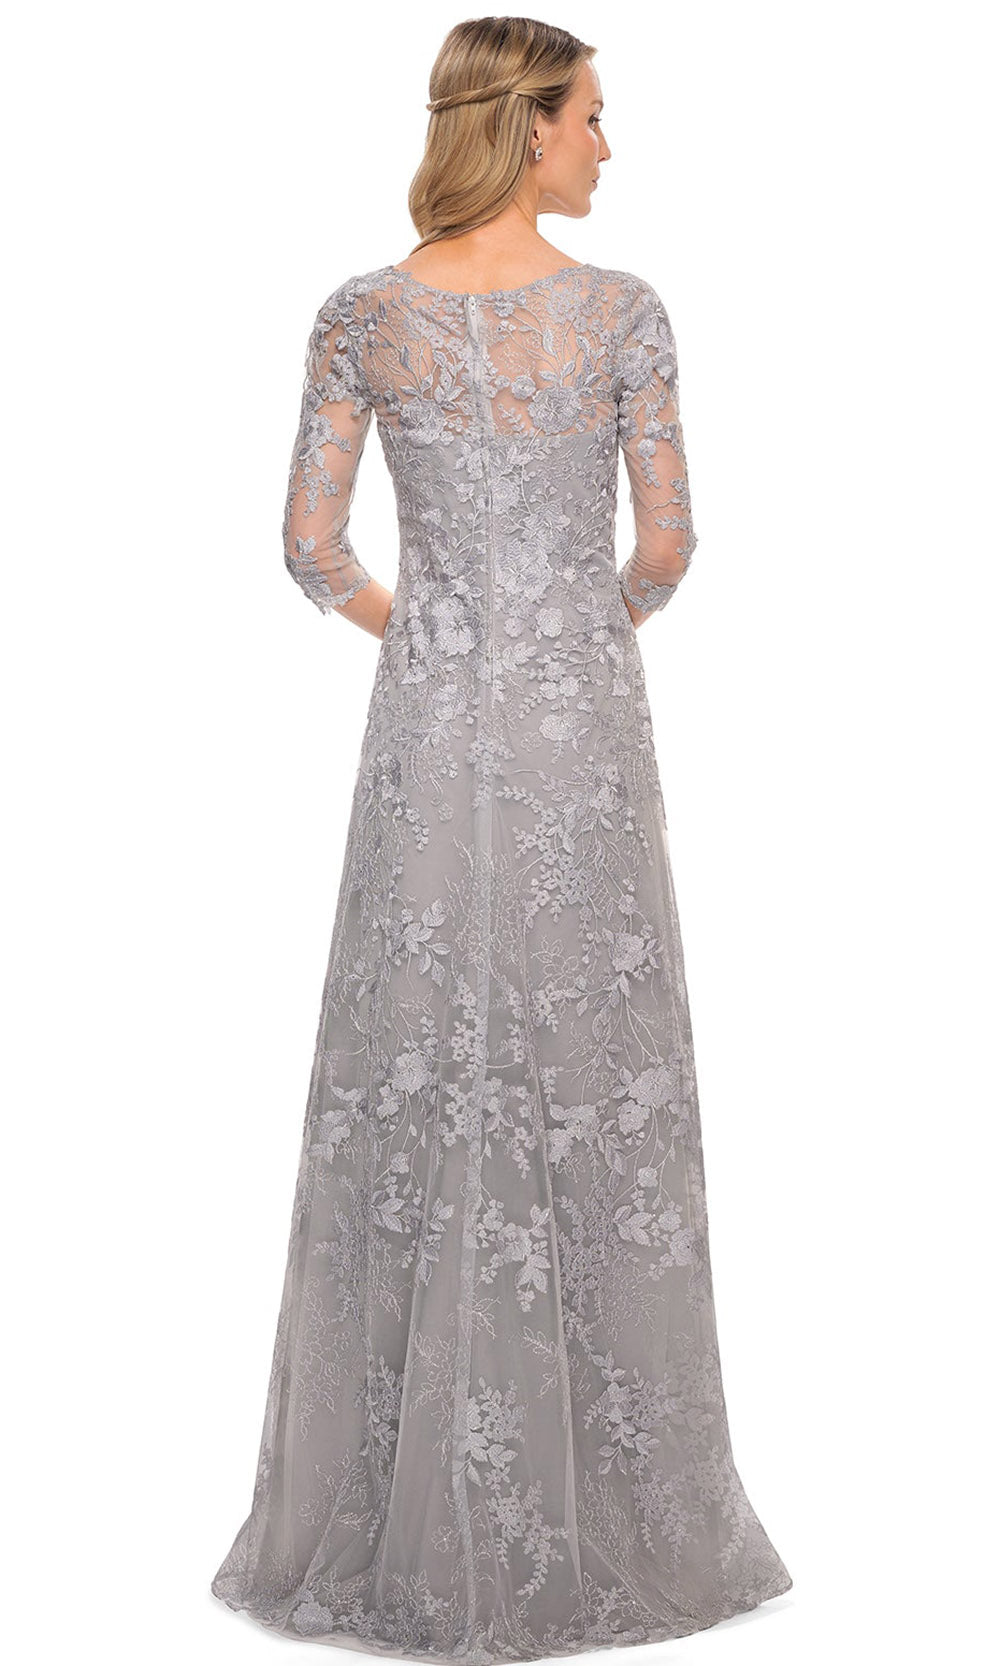 La Femme - 29989 Embroidered Quarter-Length Sleeves Long Dress In Silver